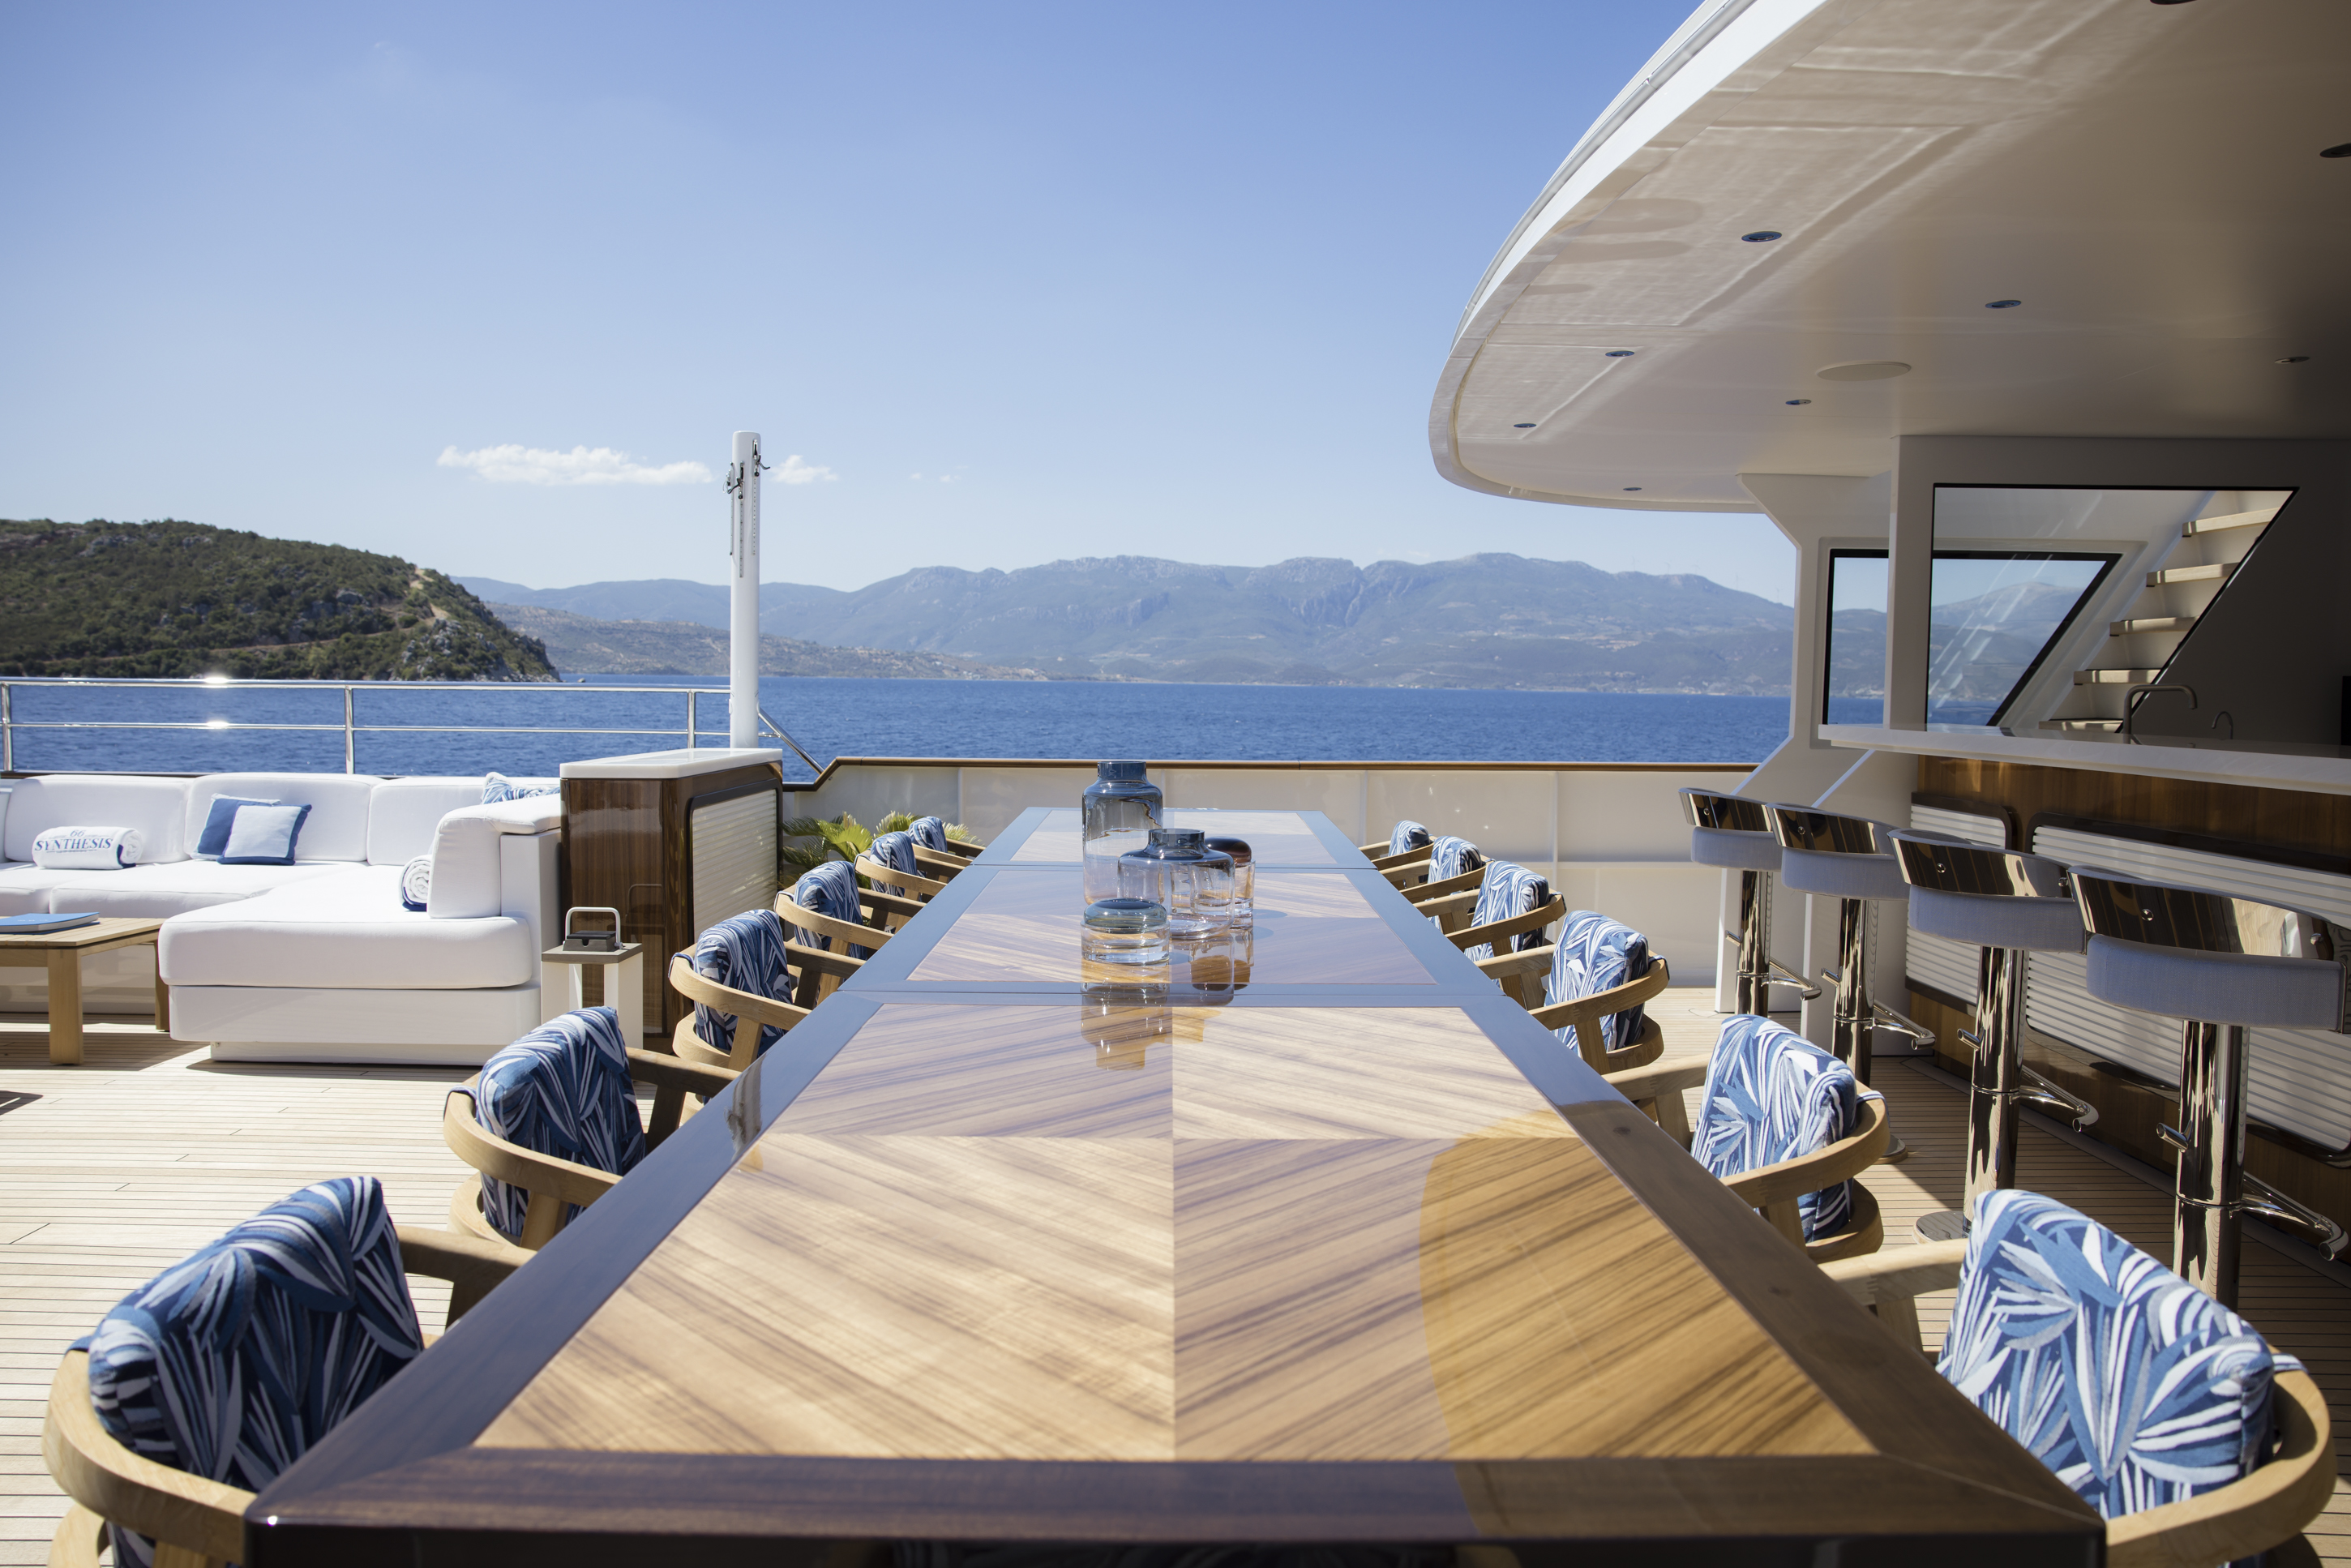 Banquet sized dining table on the bridge deck